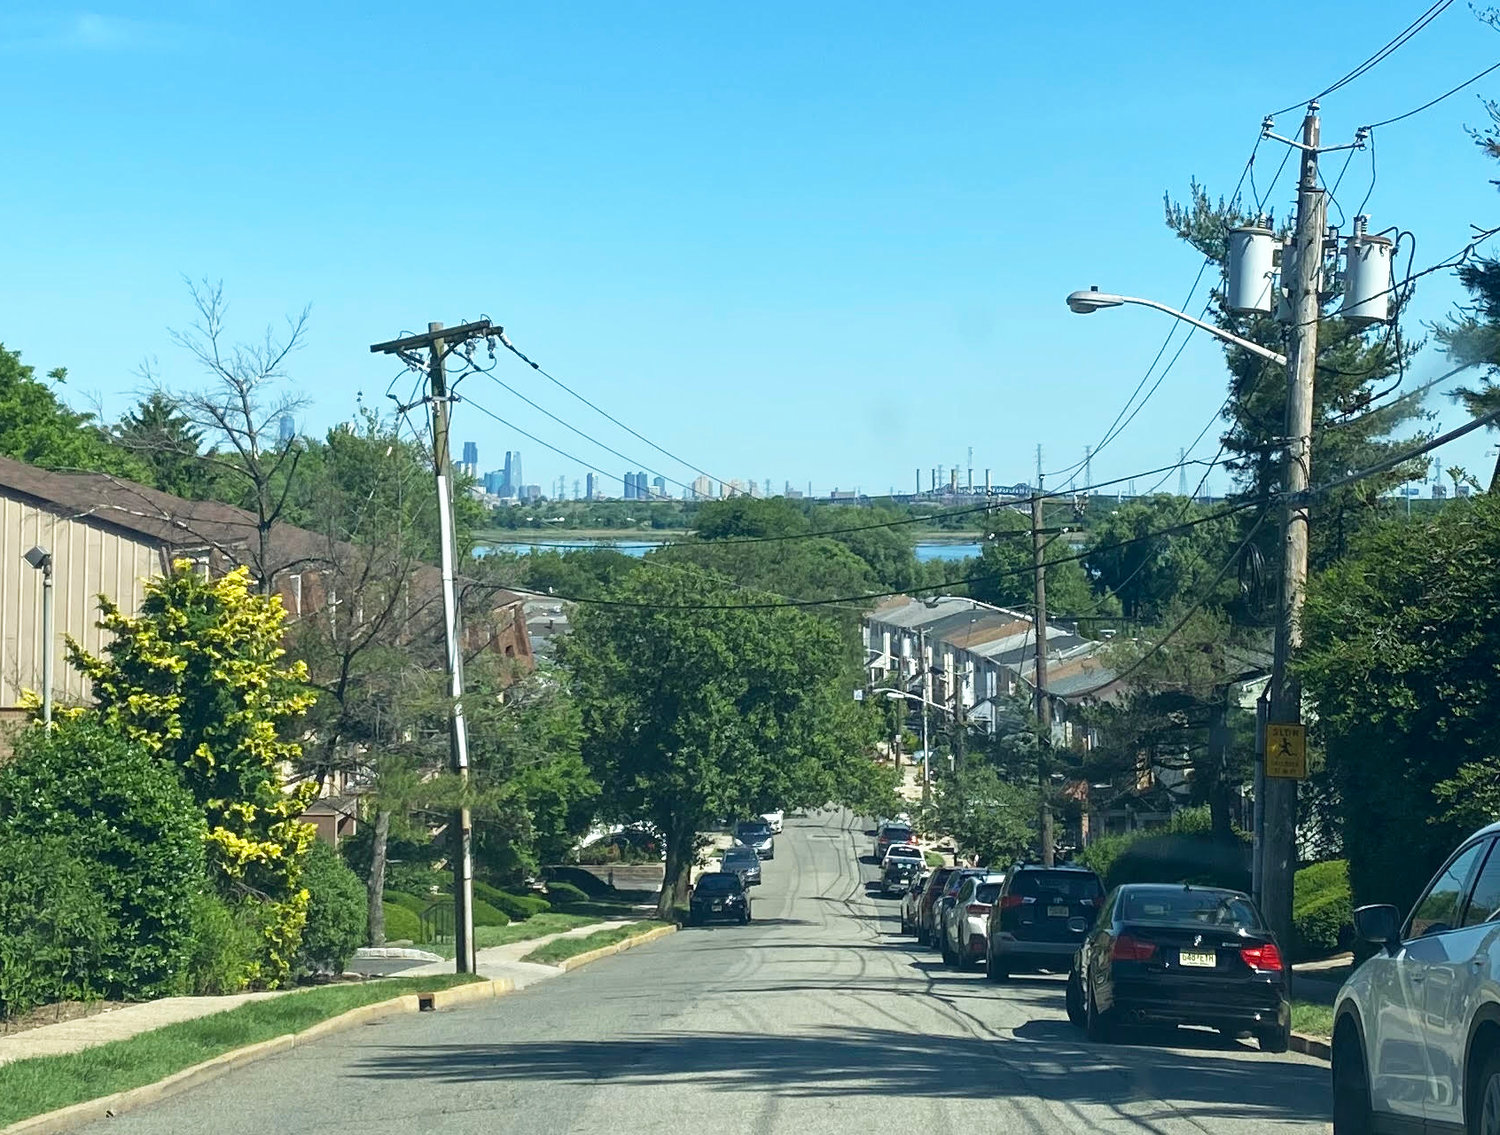 The rowhouse development built in the 1970s plunges down the hill off Schuyler Avenue in Kearny, N.J., ending in a cul de sac at the edge of the Meadowlands, with the New York City skyline in the distance.